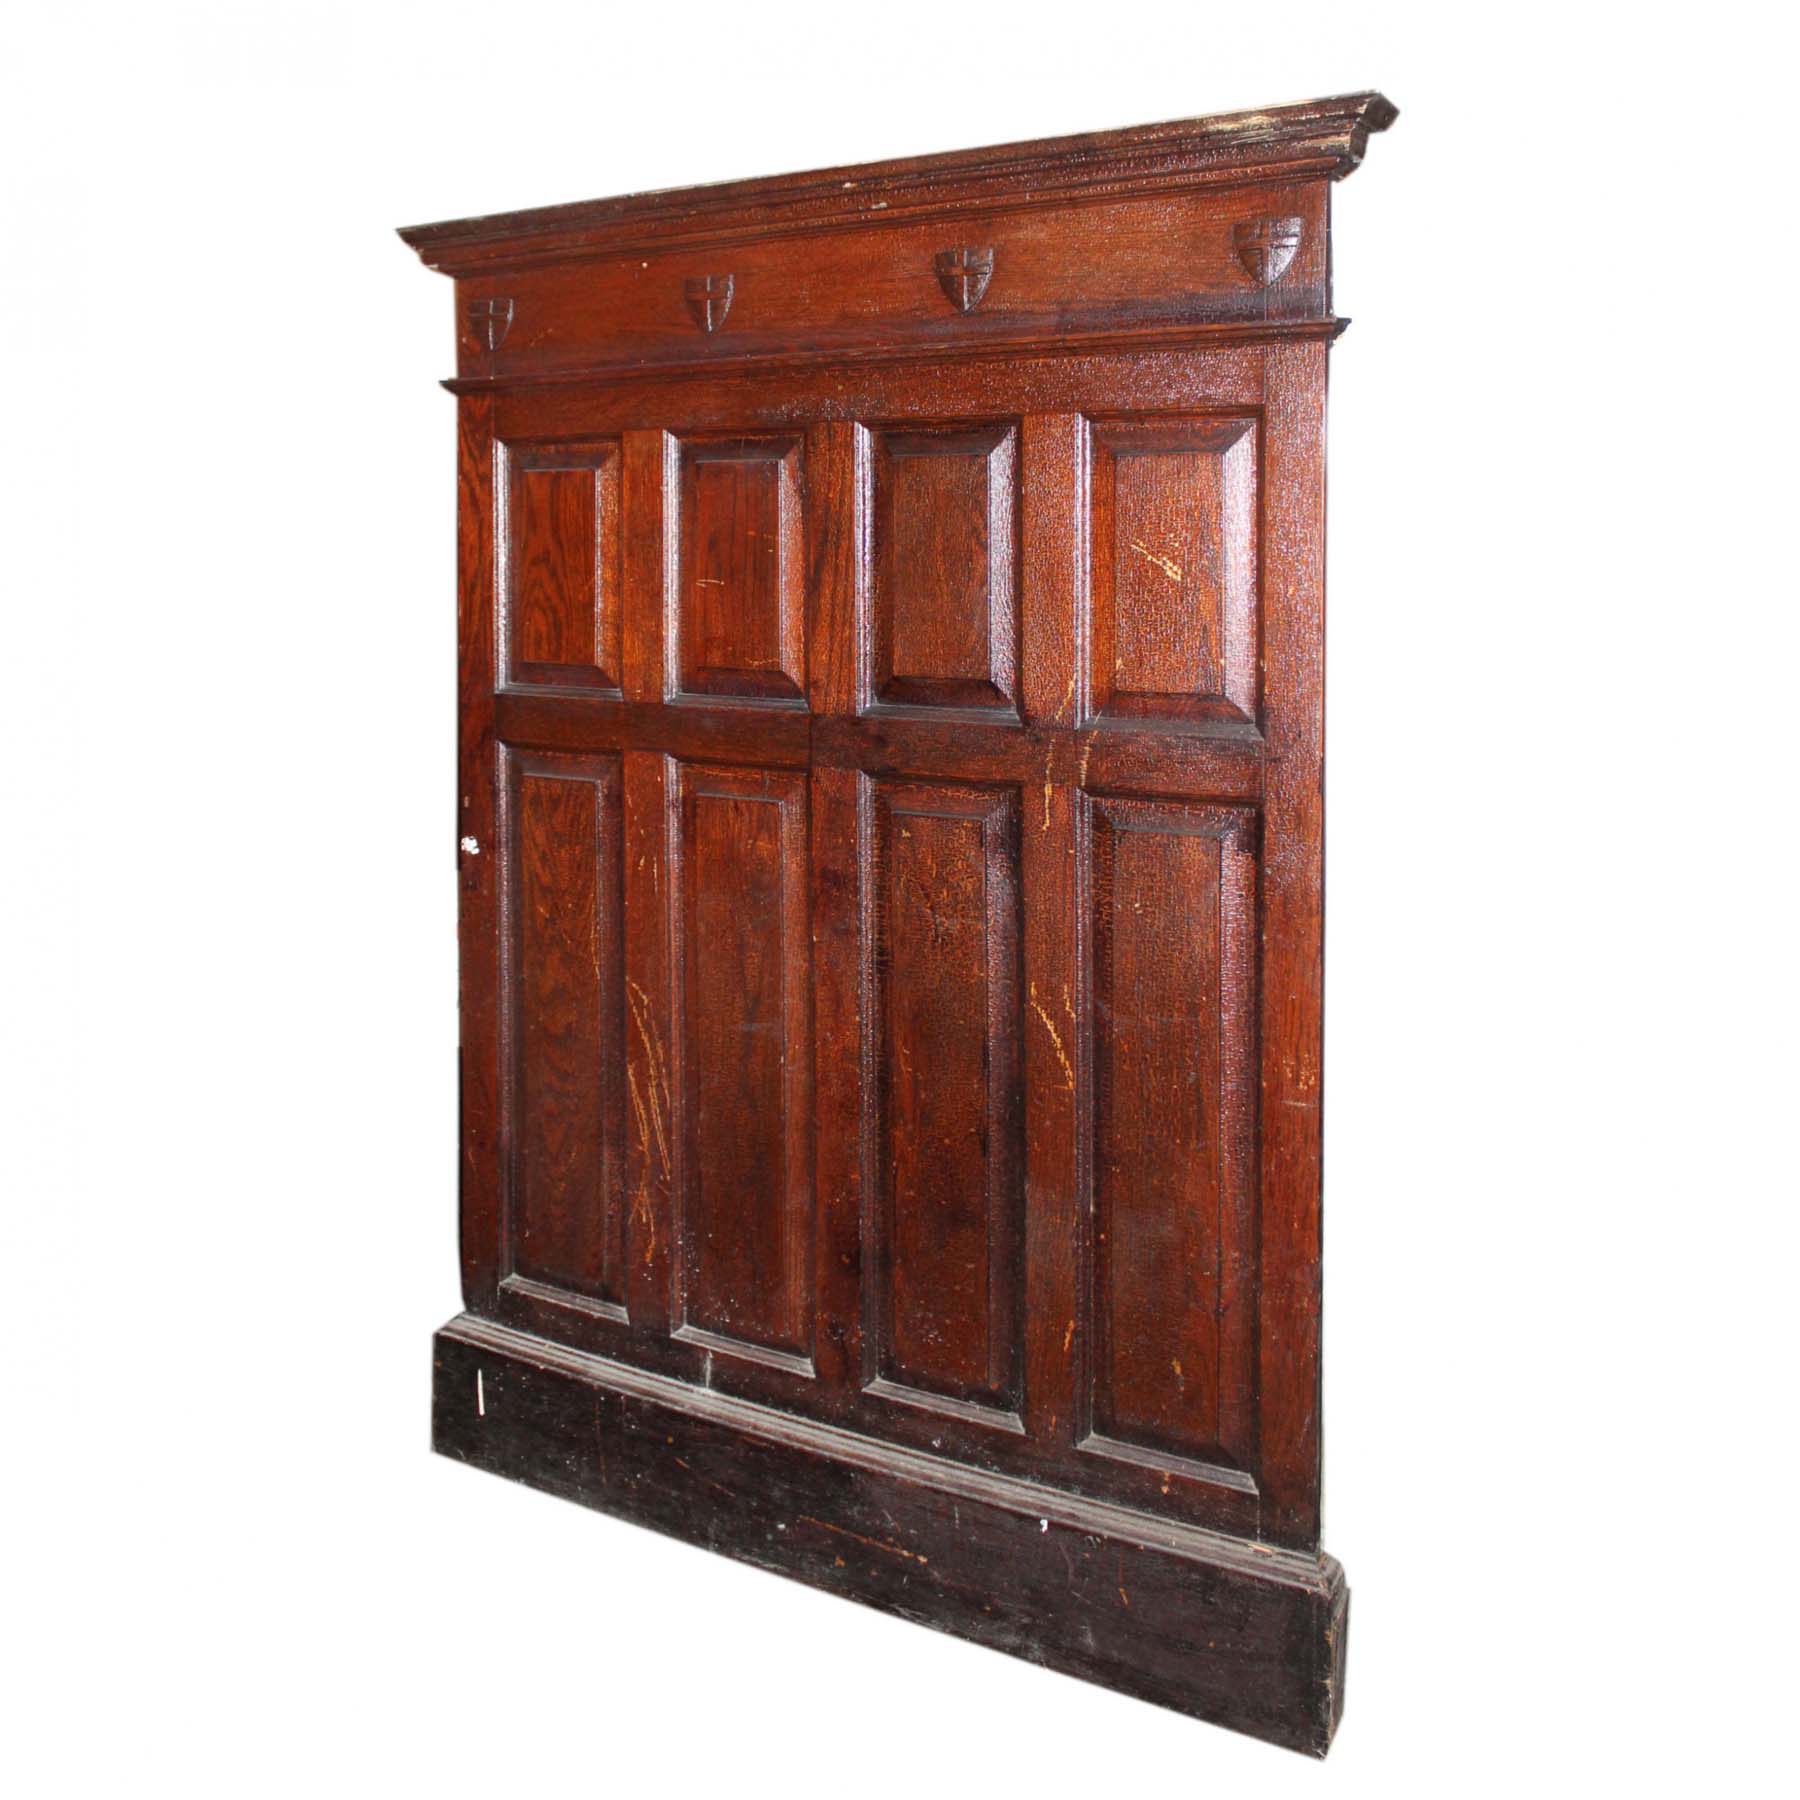 SOLD Salvaged Antique Tudor Wainscoting Panels -71523